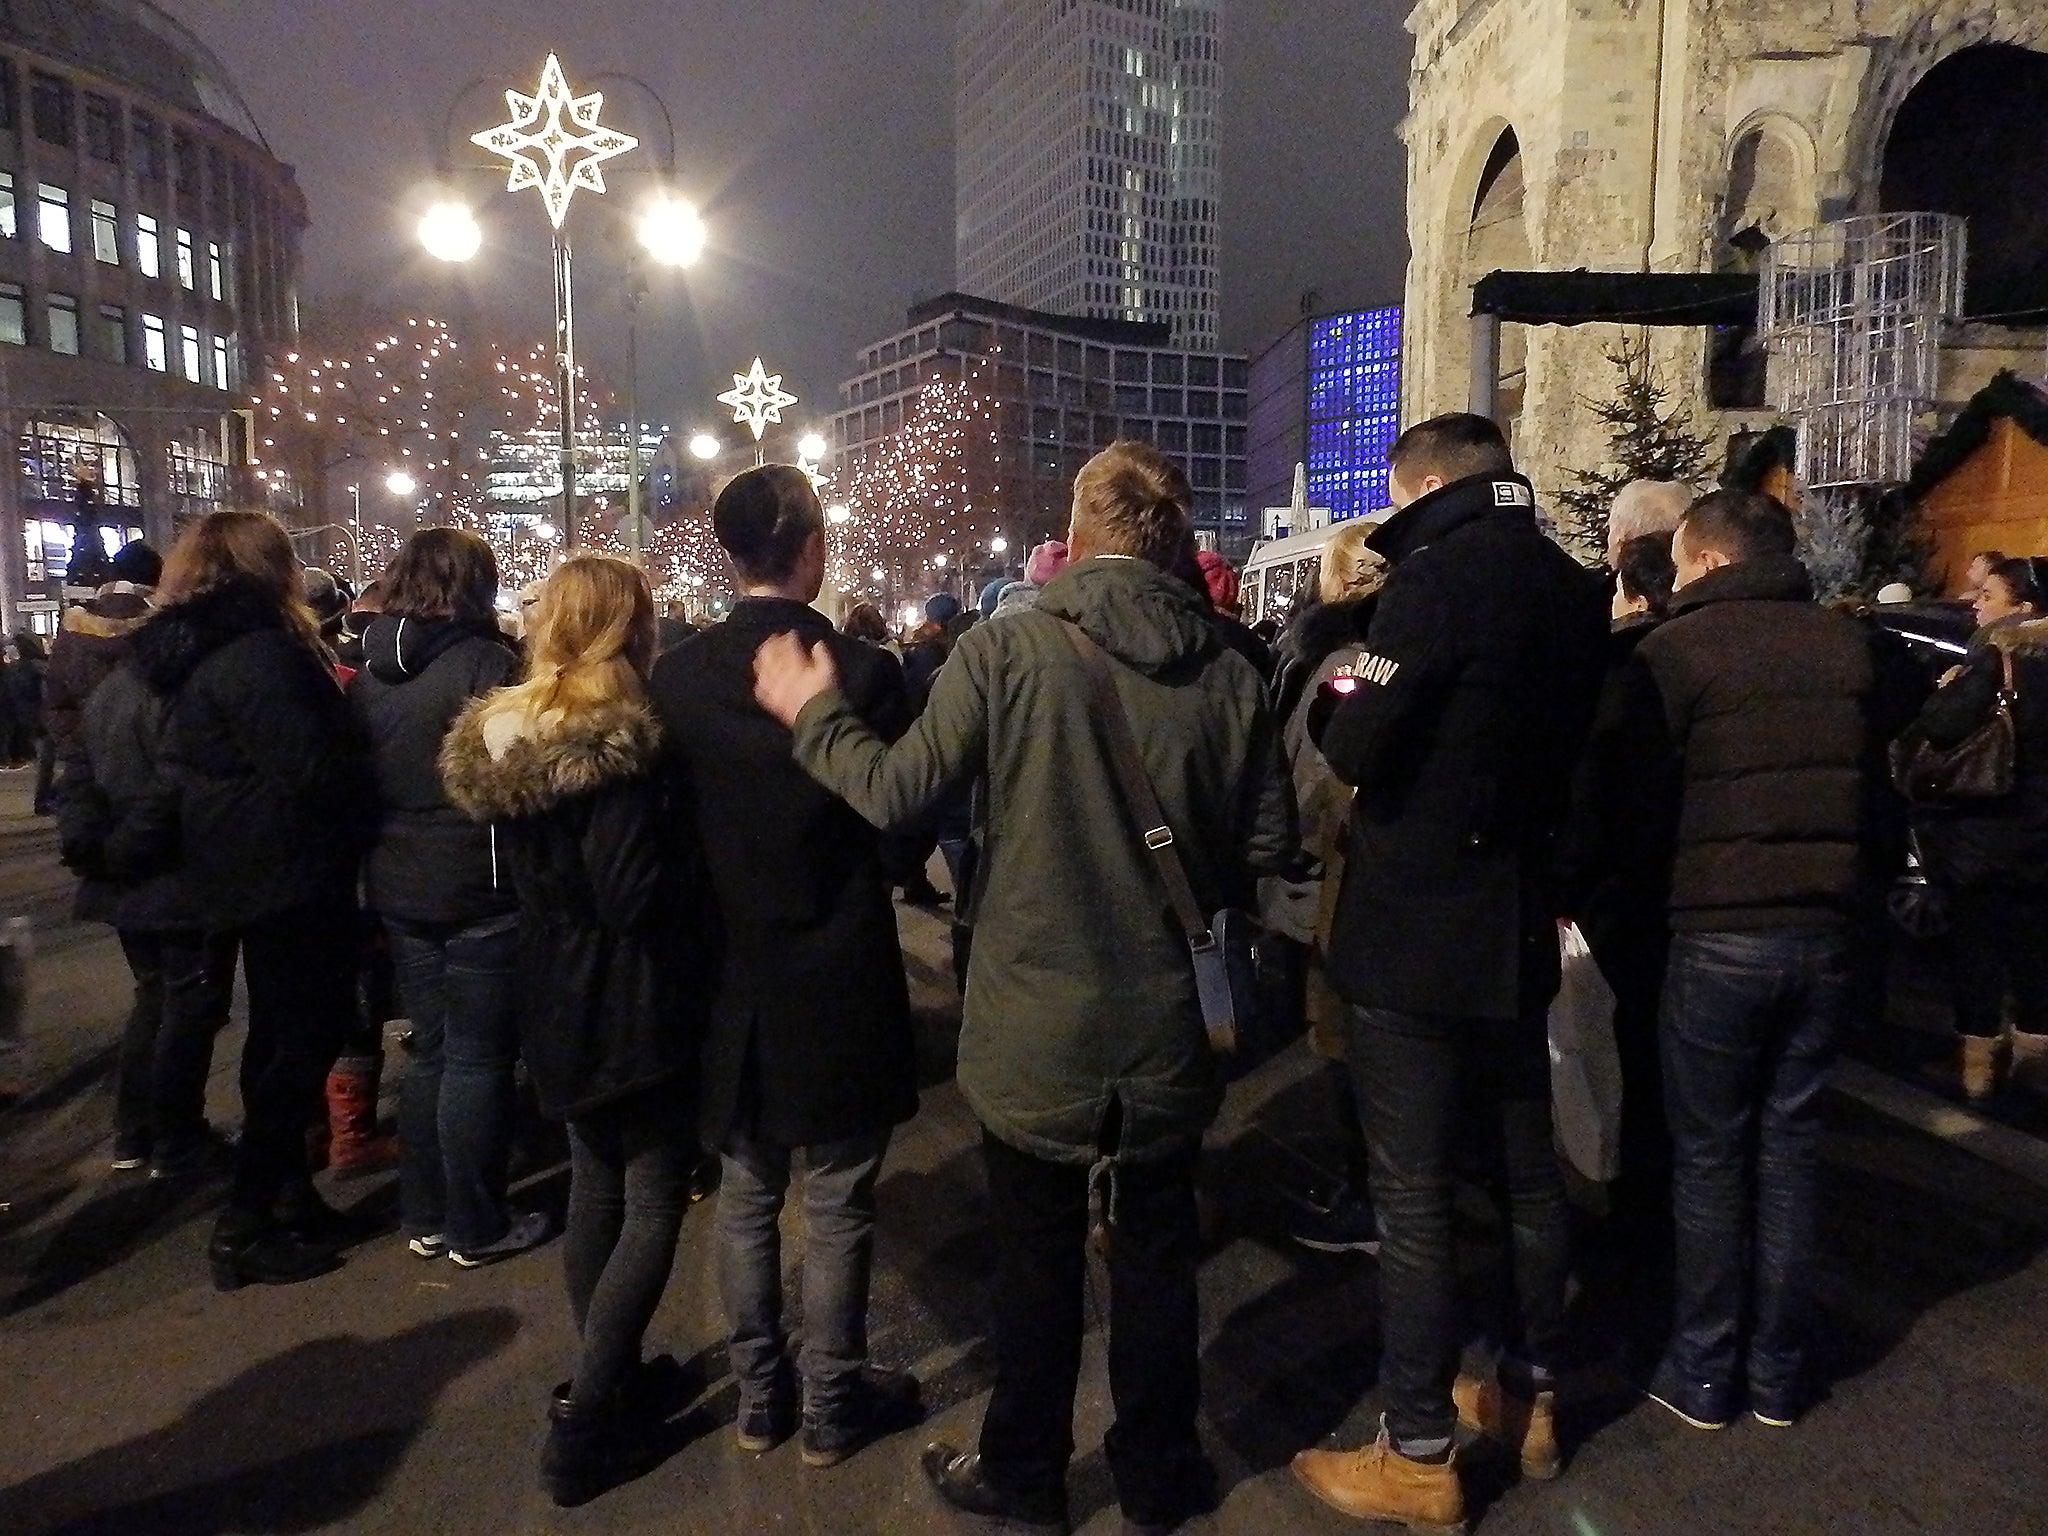 People take part in a vigil in Berlin, Germany after the truck attack at the Christmas market